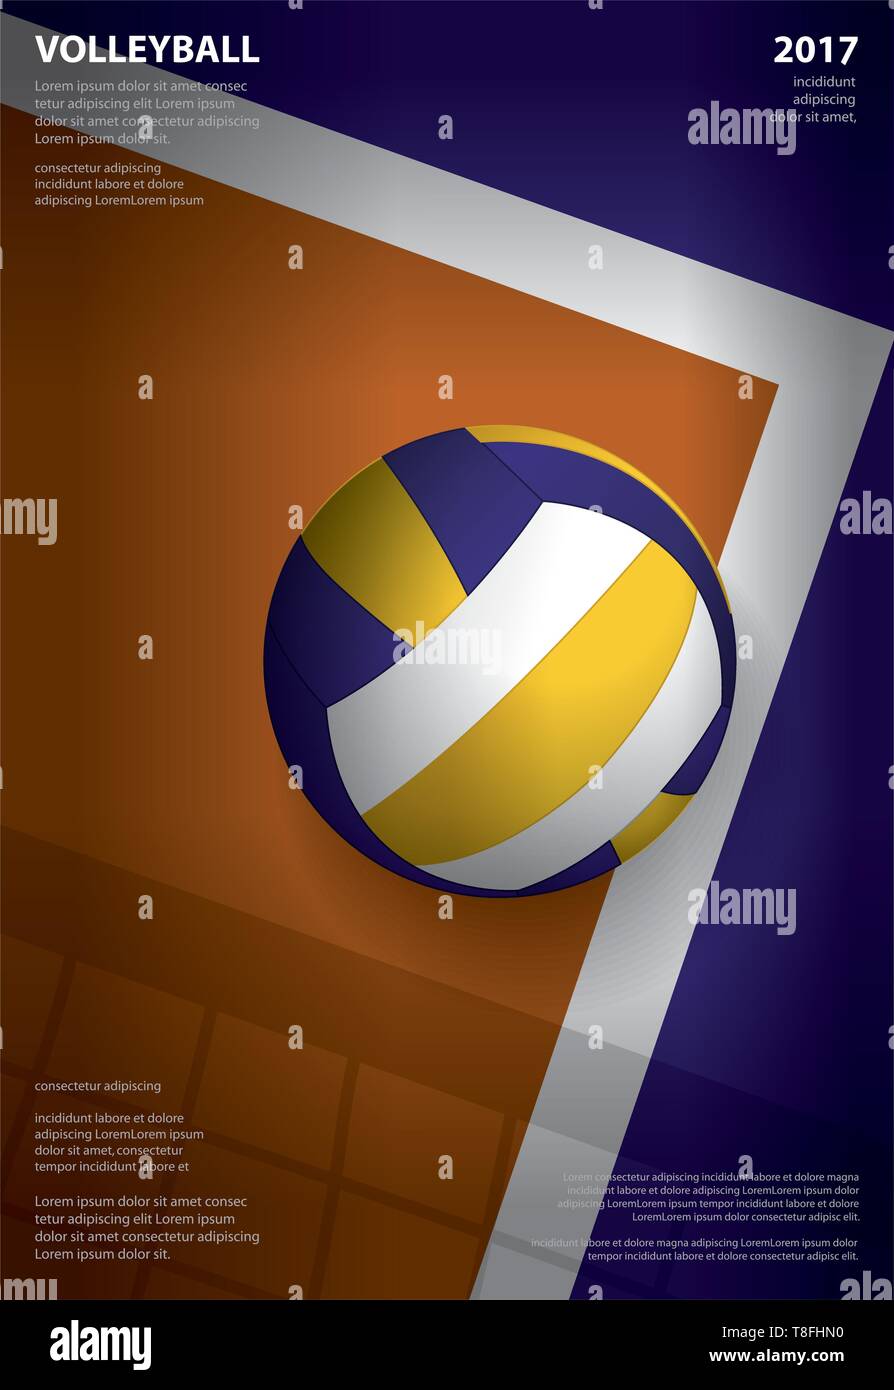 Volleyball Tournament Poster Template Design Vector Illustration Stock Vector